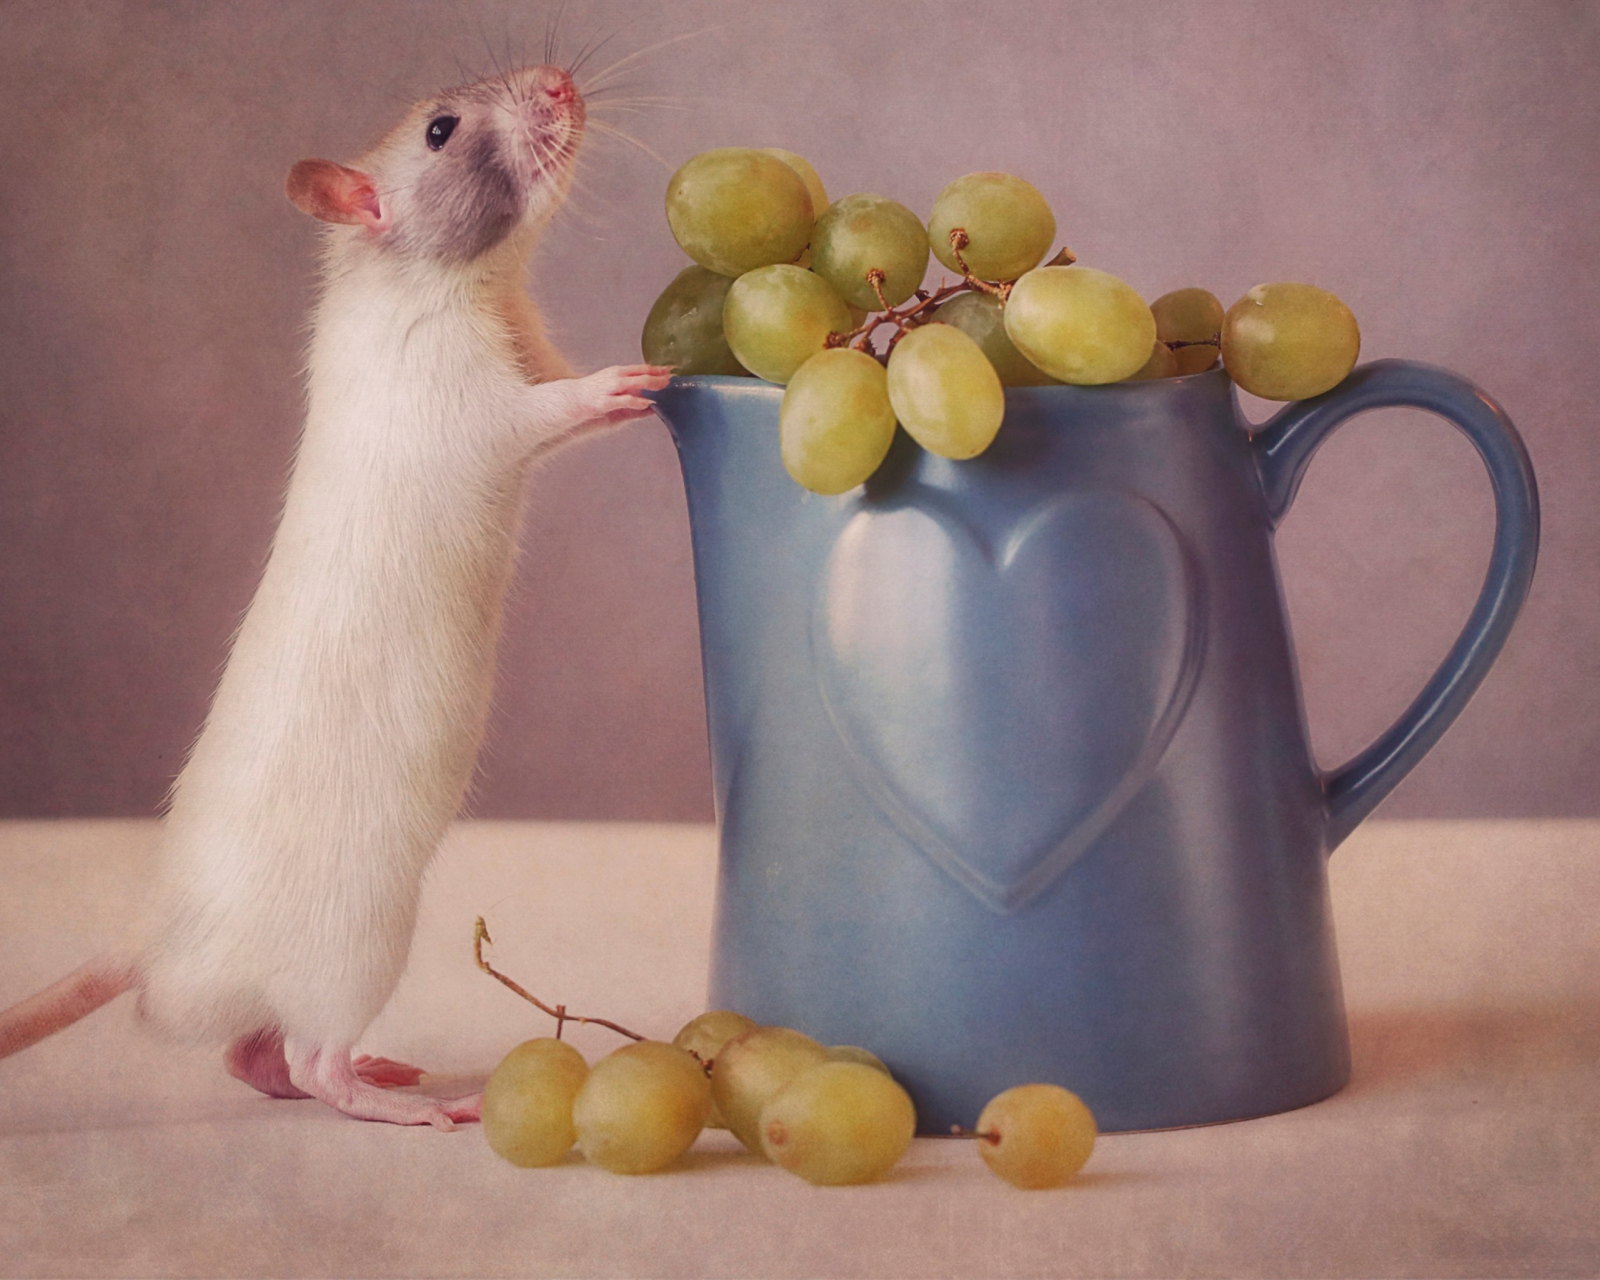 Mouse Loves Grapes wallpaper 1600x1280